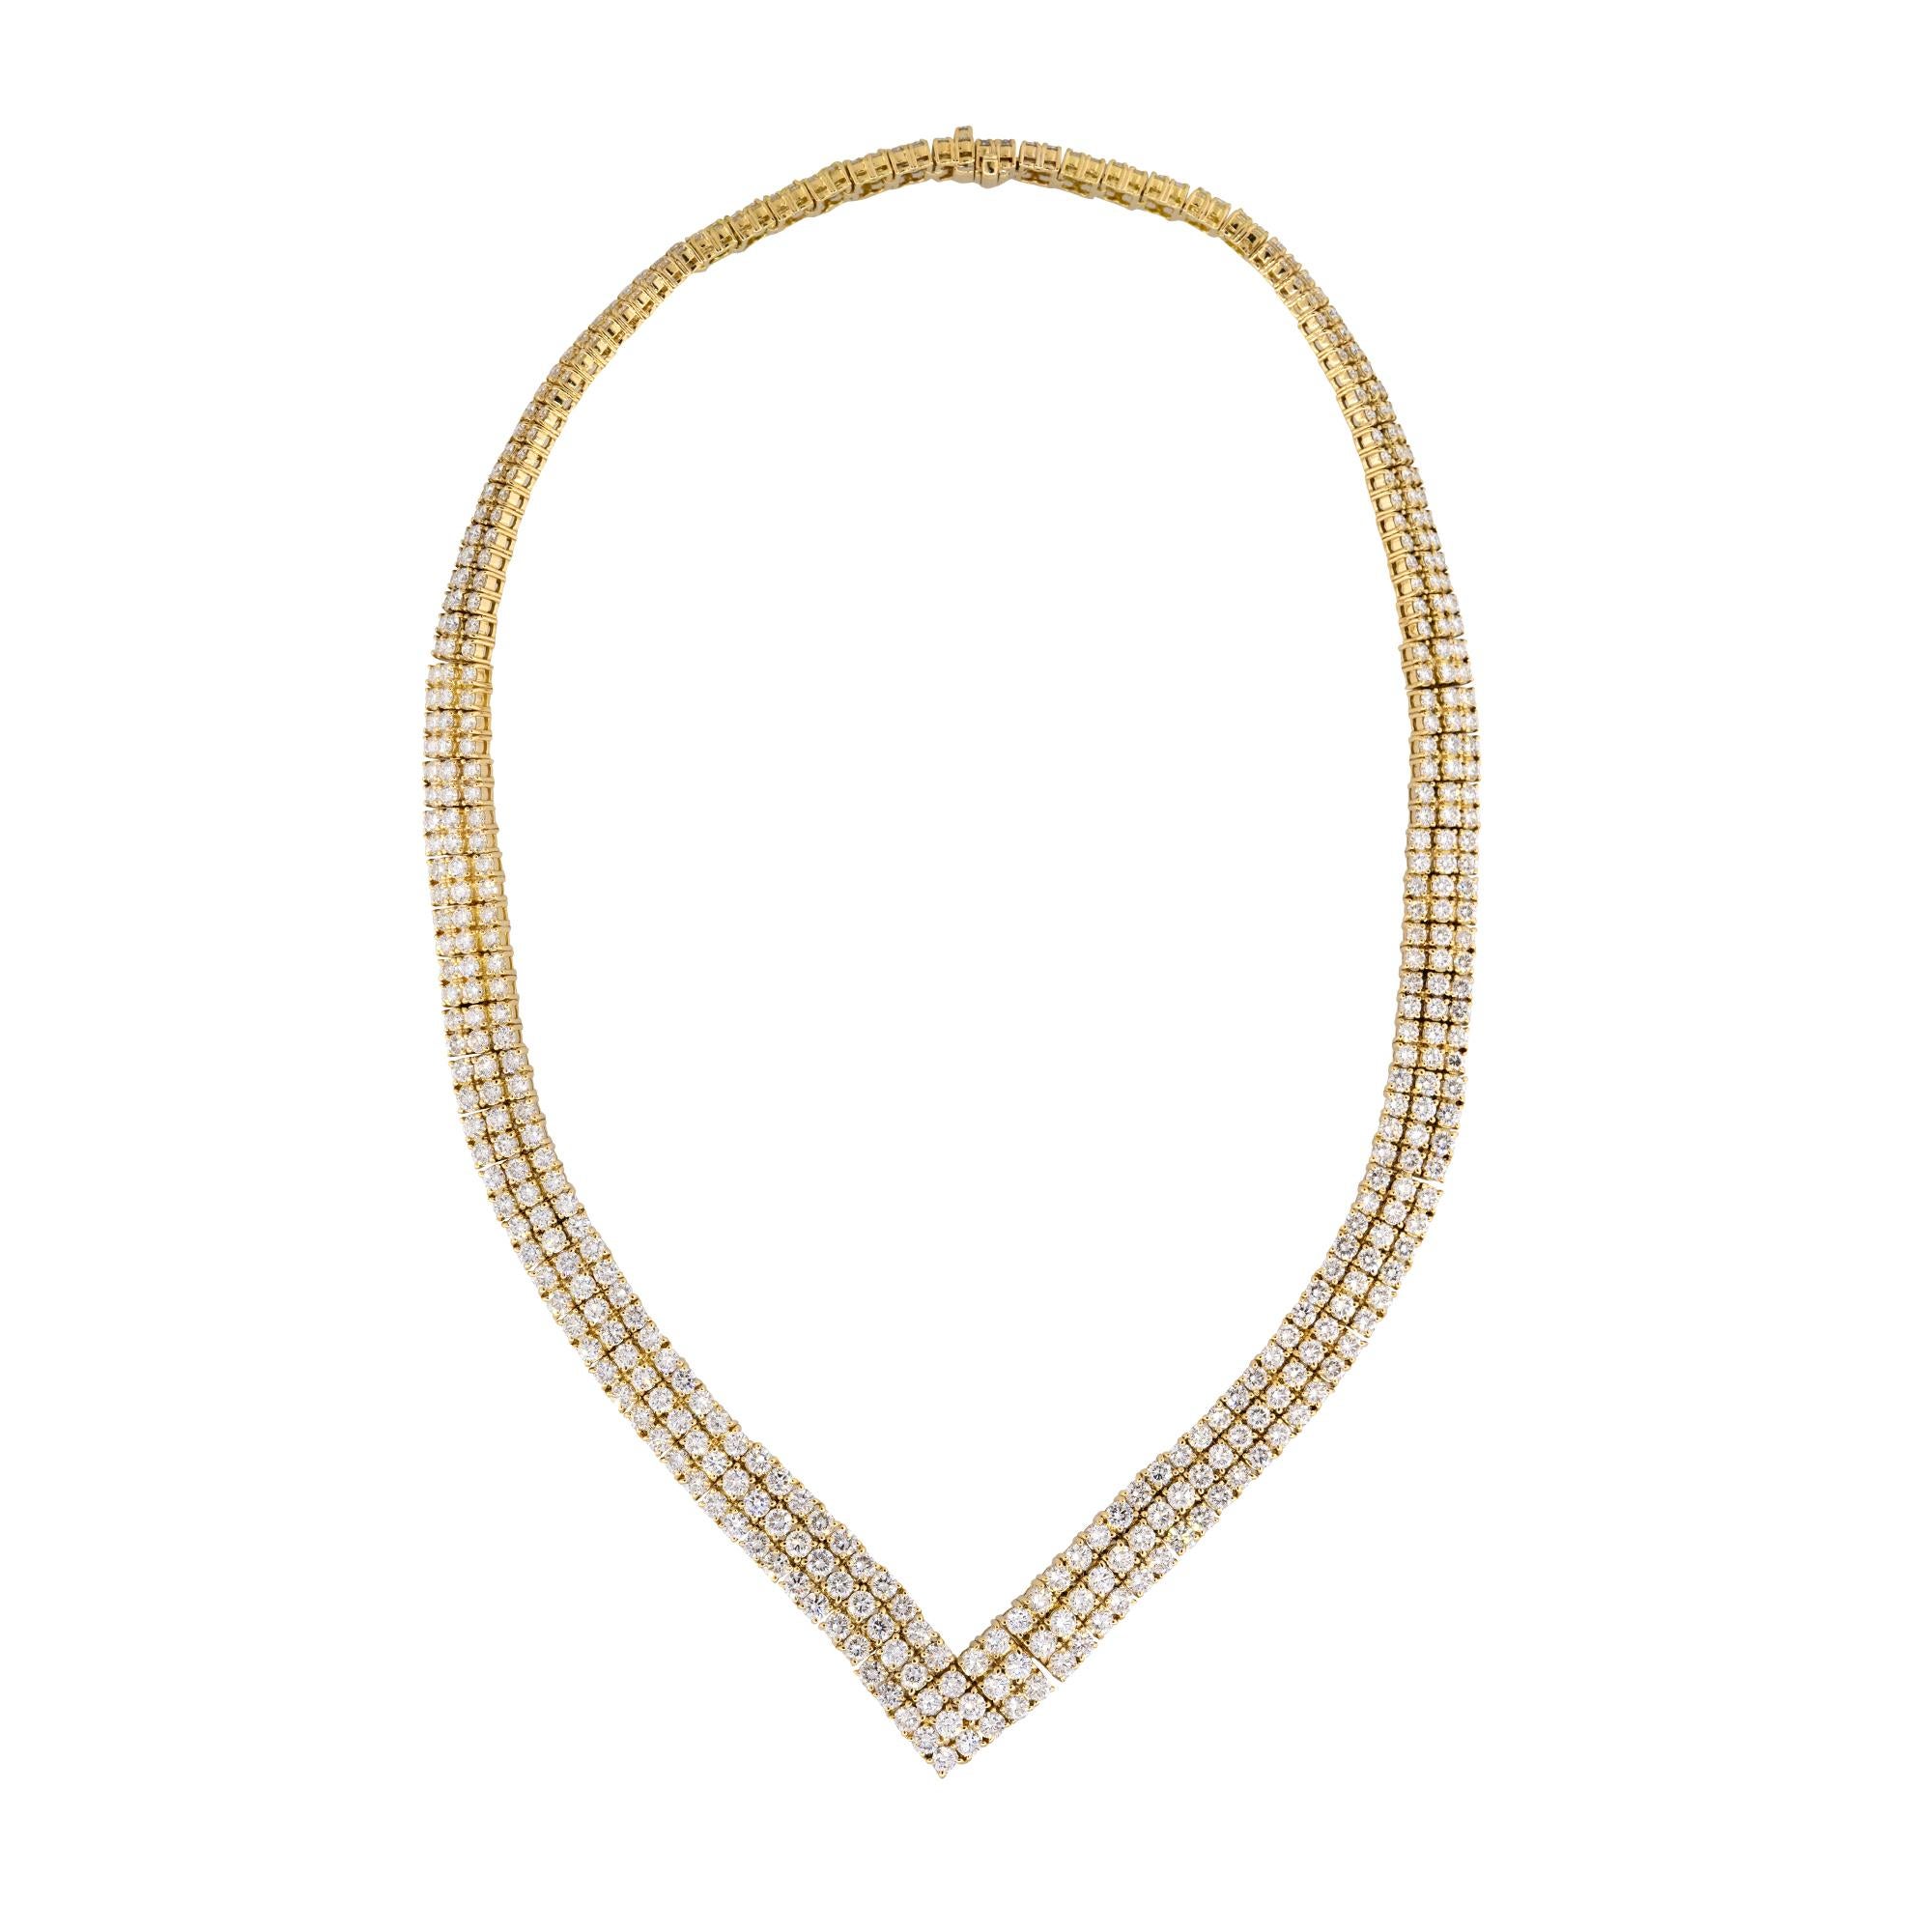 With almost 30 carats of near colorless diamonds, this beautiful diamond necklace sparkles from a mile away. This necklace consists of 3 rows of approximately 495 diamonds and is set in 18 karat yellow gold. This timeless piece of jewelry would make